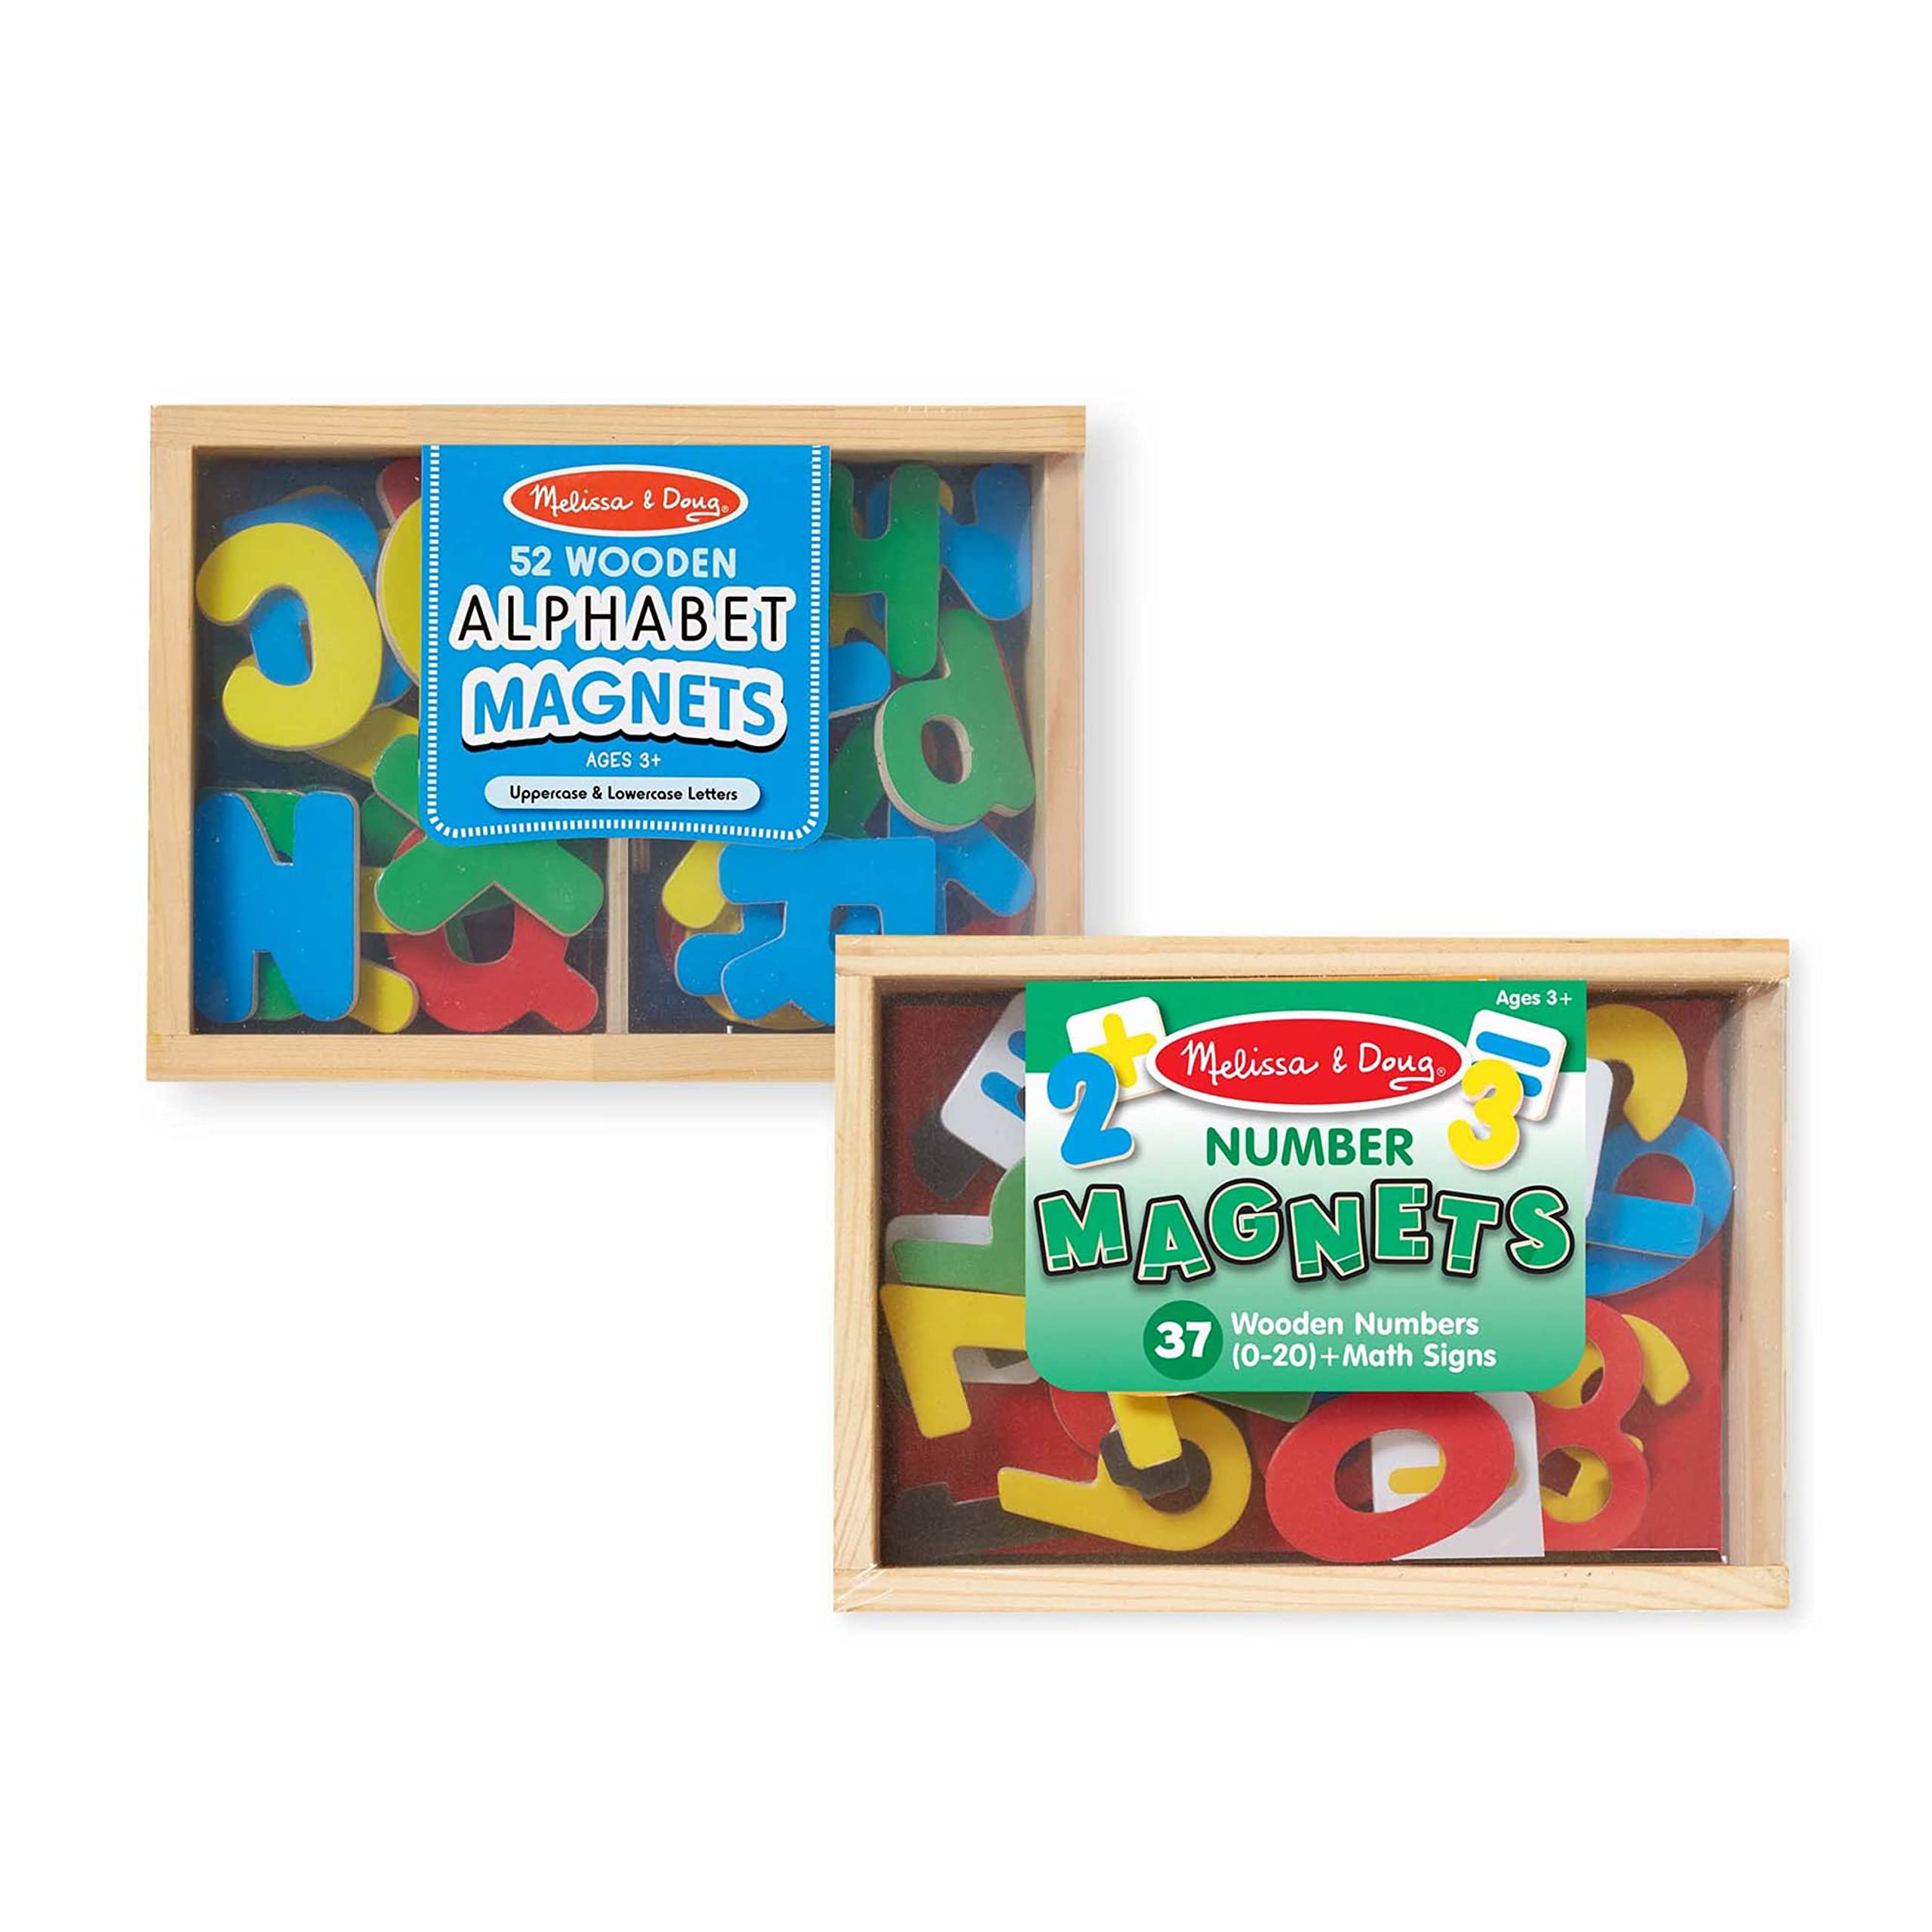 Melissa & Doug Deluxe Magnetic Letters and Numbers Set With 89 Wooden Magnets - Alphabet Letter Magnets, Number Magnets, Learning Toys For Preschoolers And Kids Ages 3+